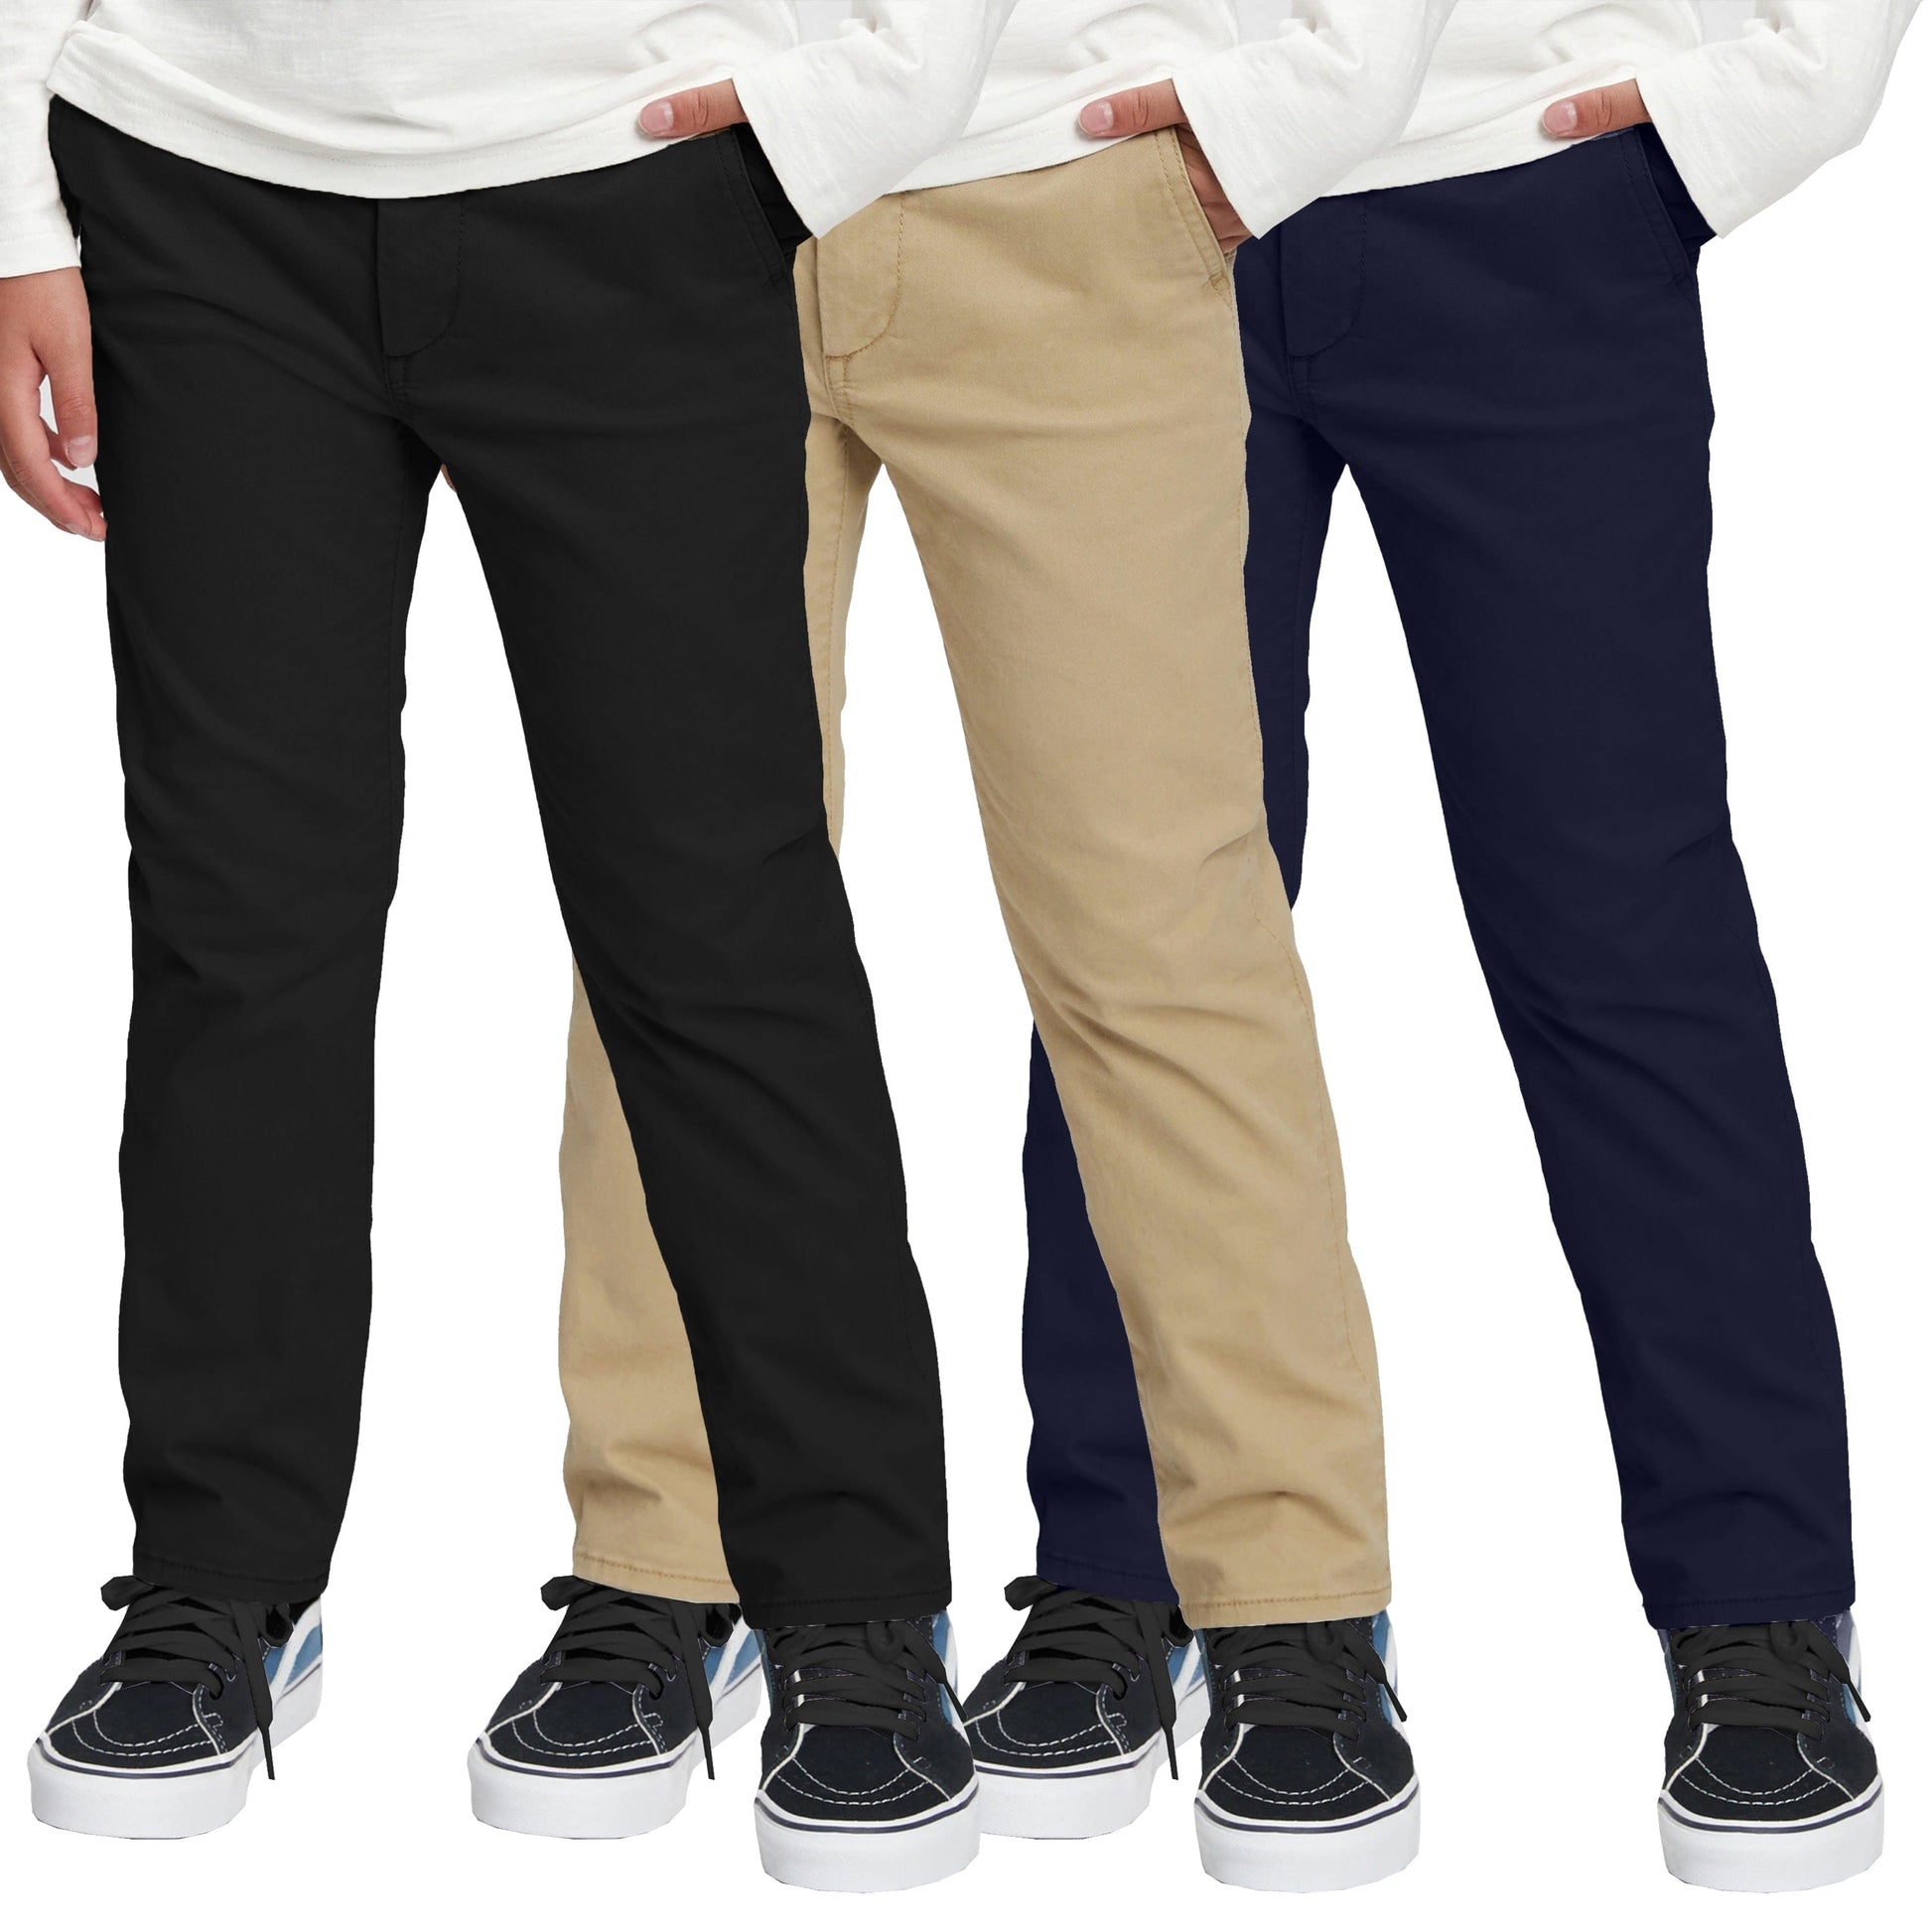 Boy's Stretch Slim Fit Flat Front Pants - GalaxybyHarvic